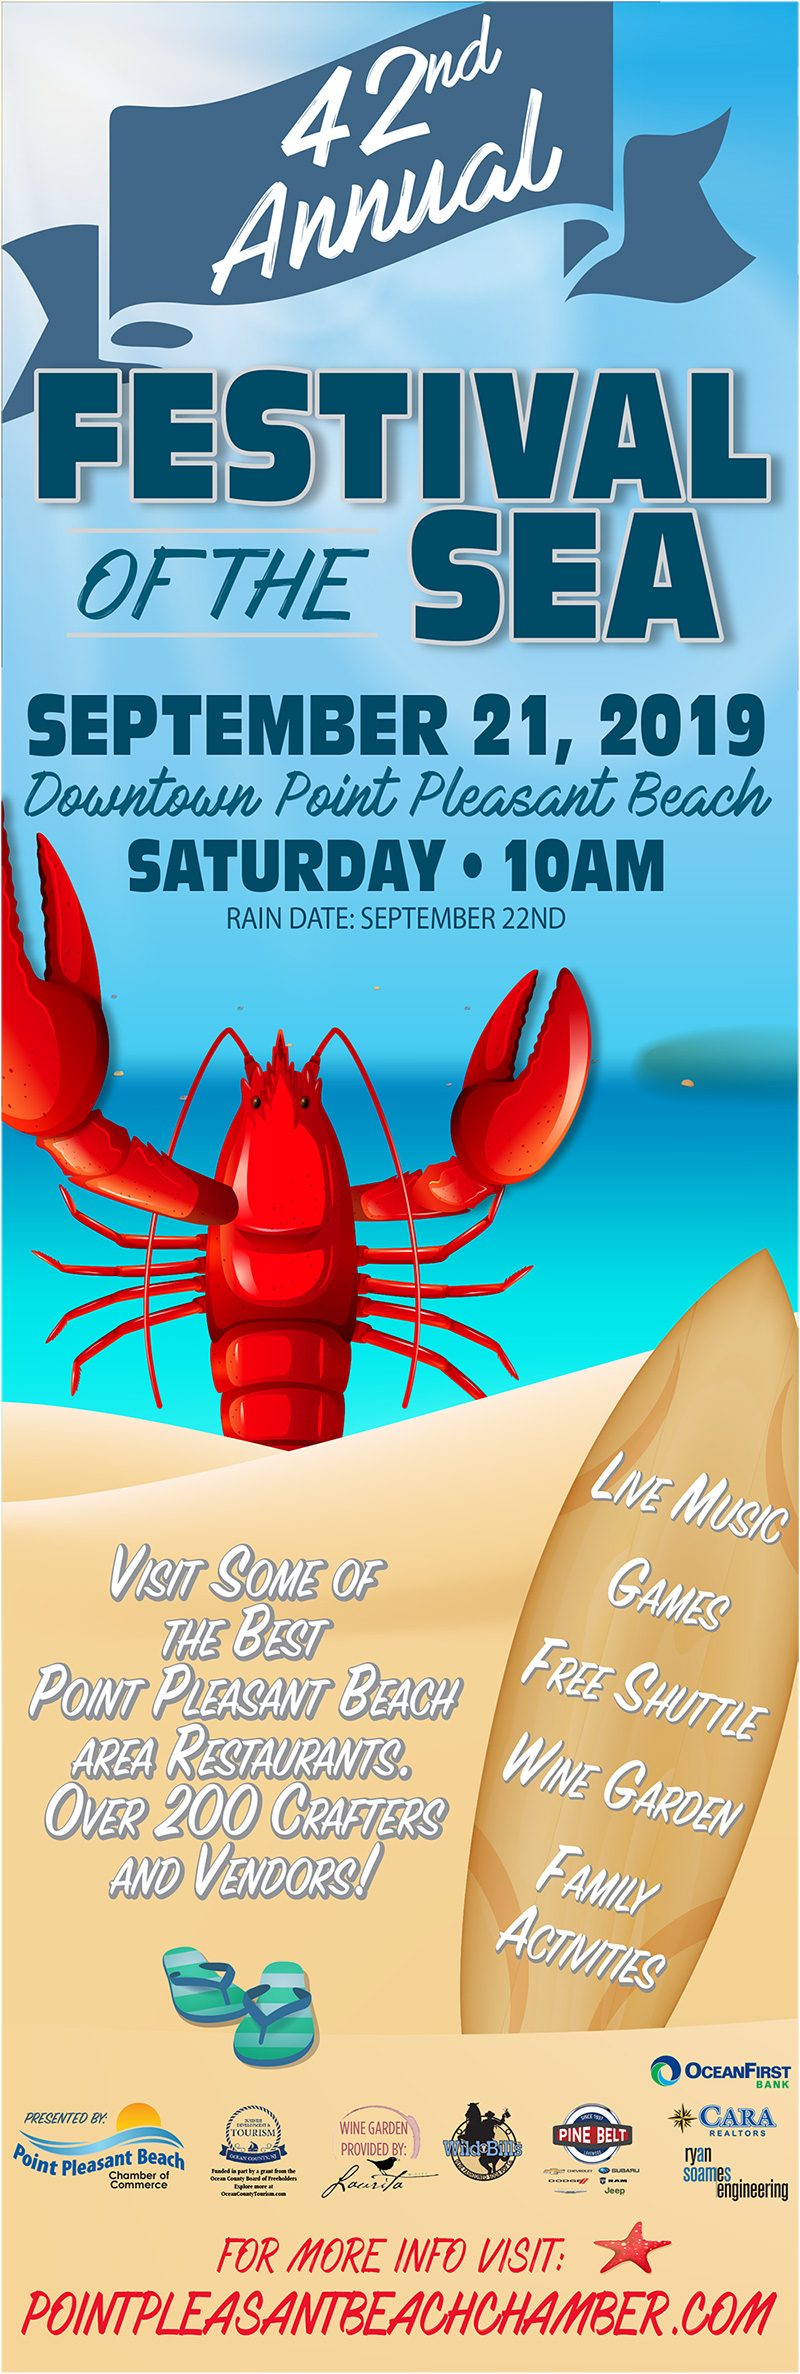 42nd Annual Festival of the Sea & Craft Show Point Pleasant Beach
